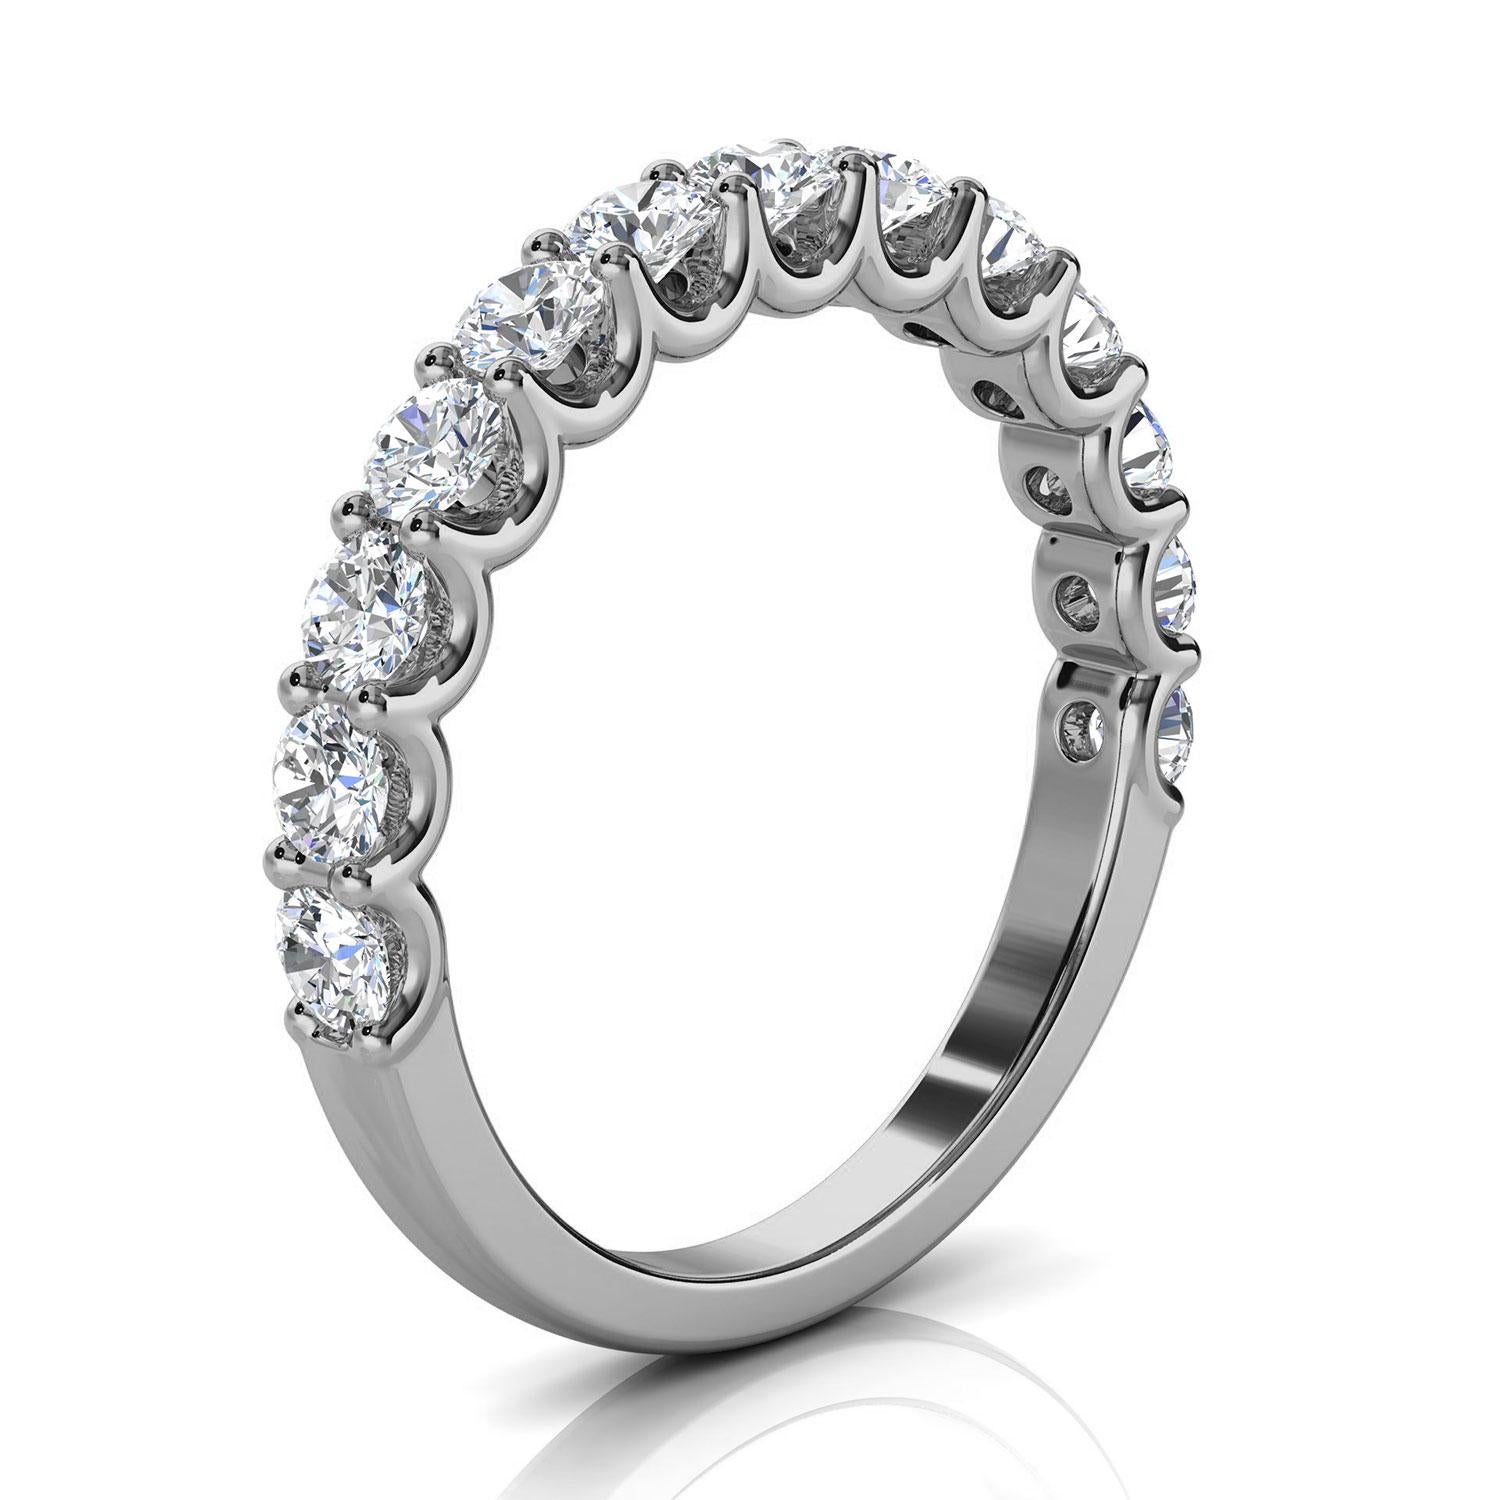 This ring features thirteen (13) perfectly matched brilliant round diamonds set on top of a 2 mm band. The 